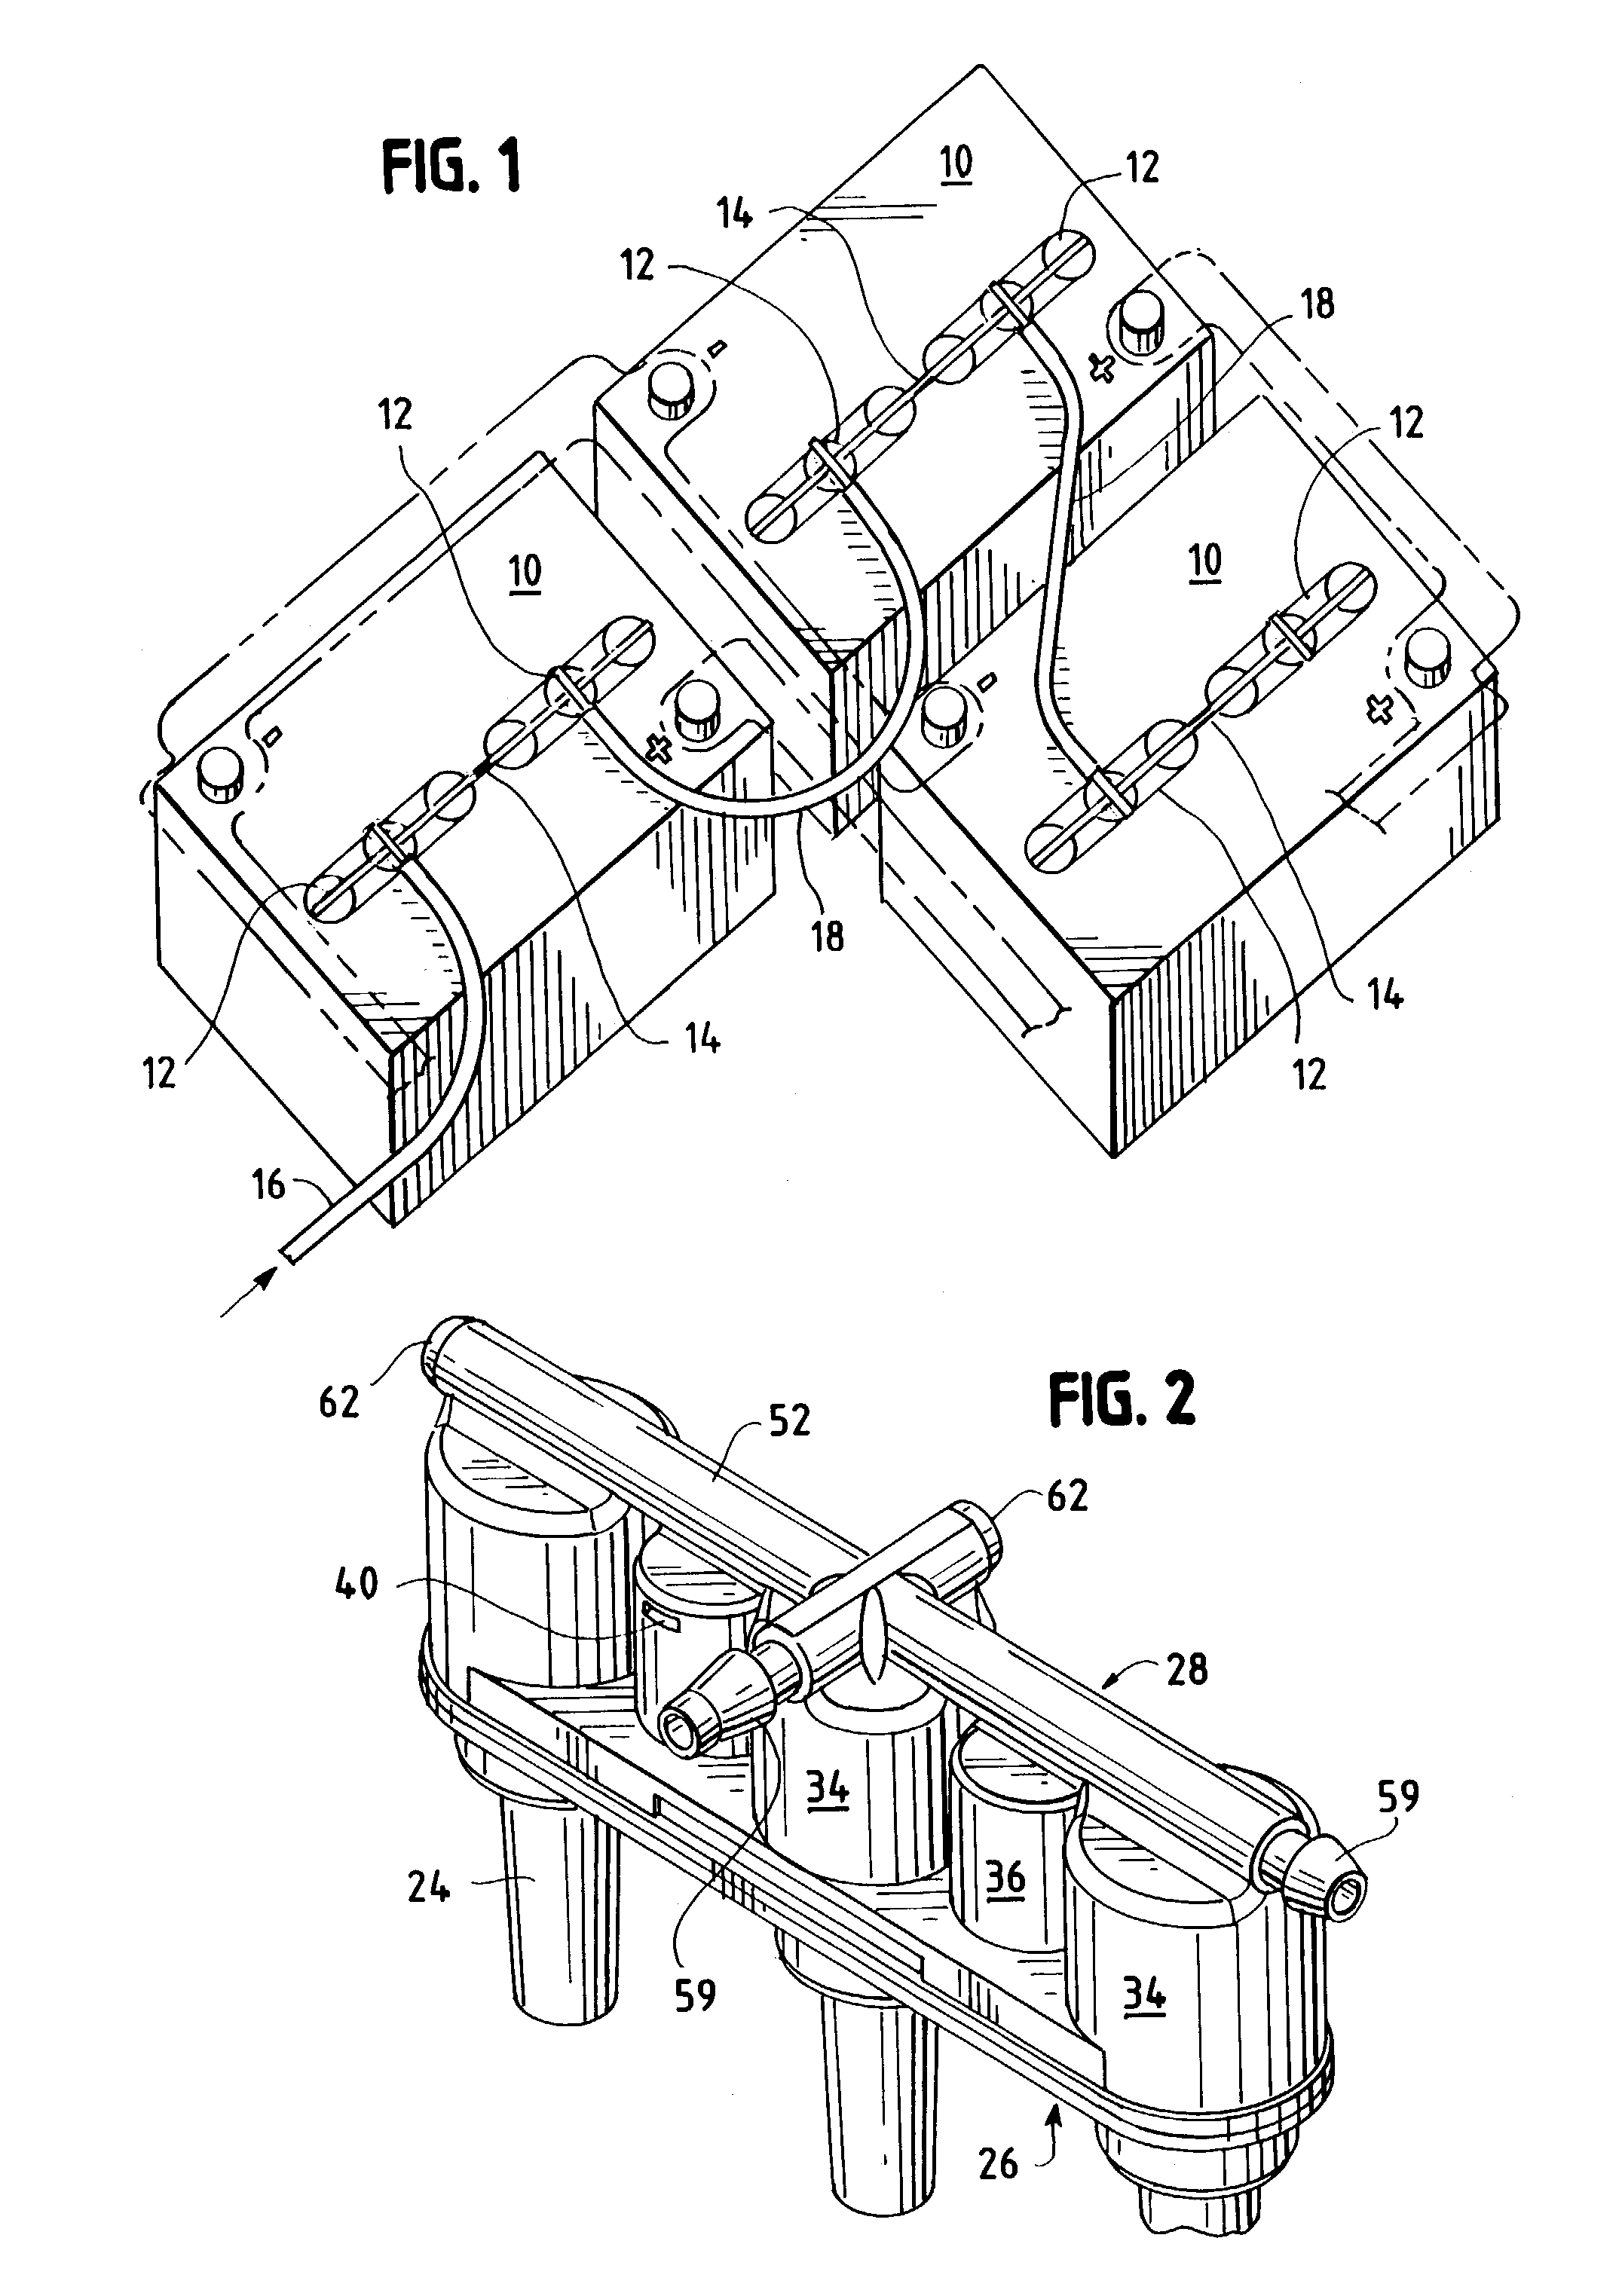 Single point watering apparatus for lead-acid battery